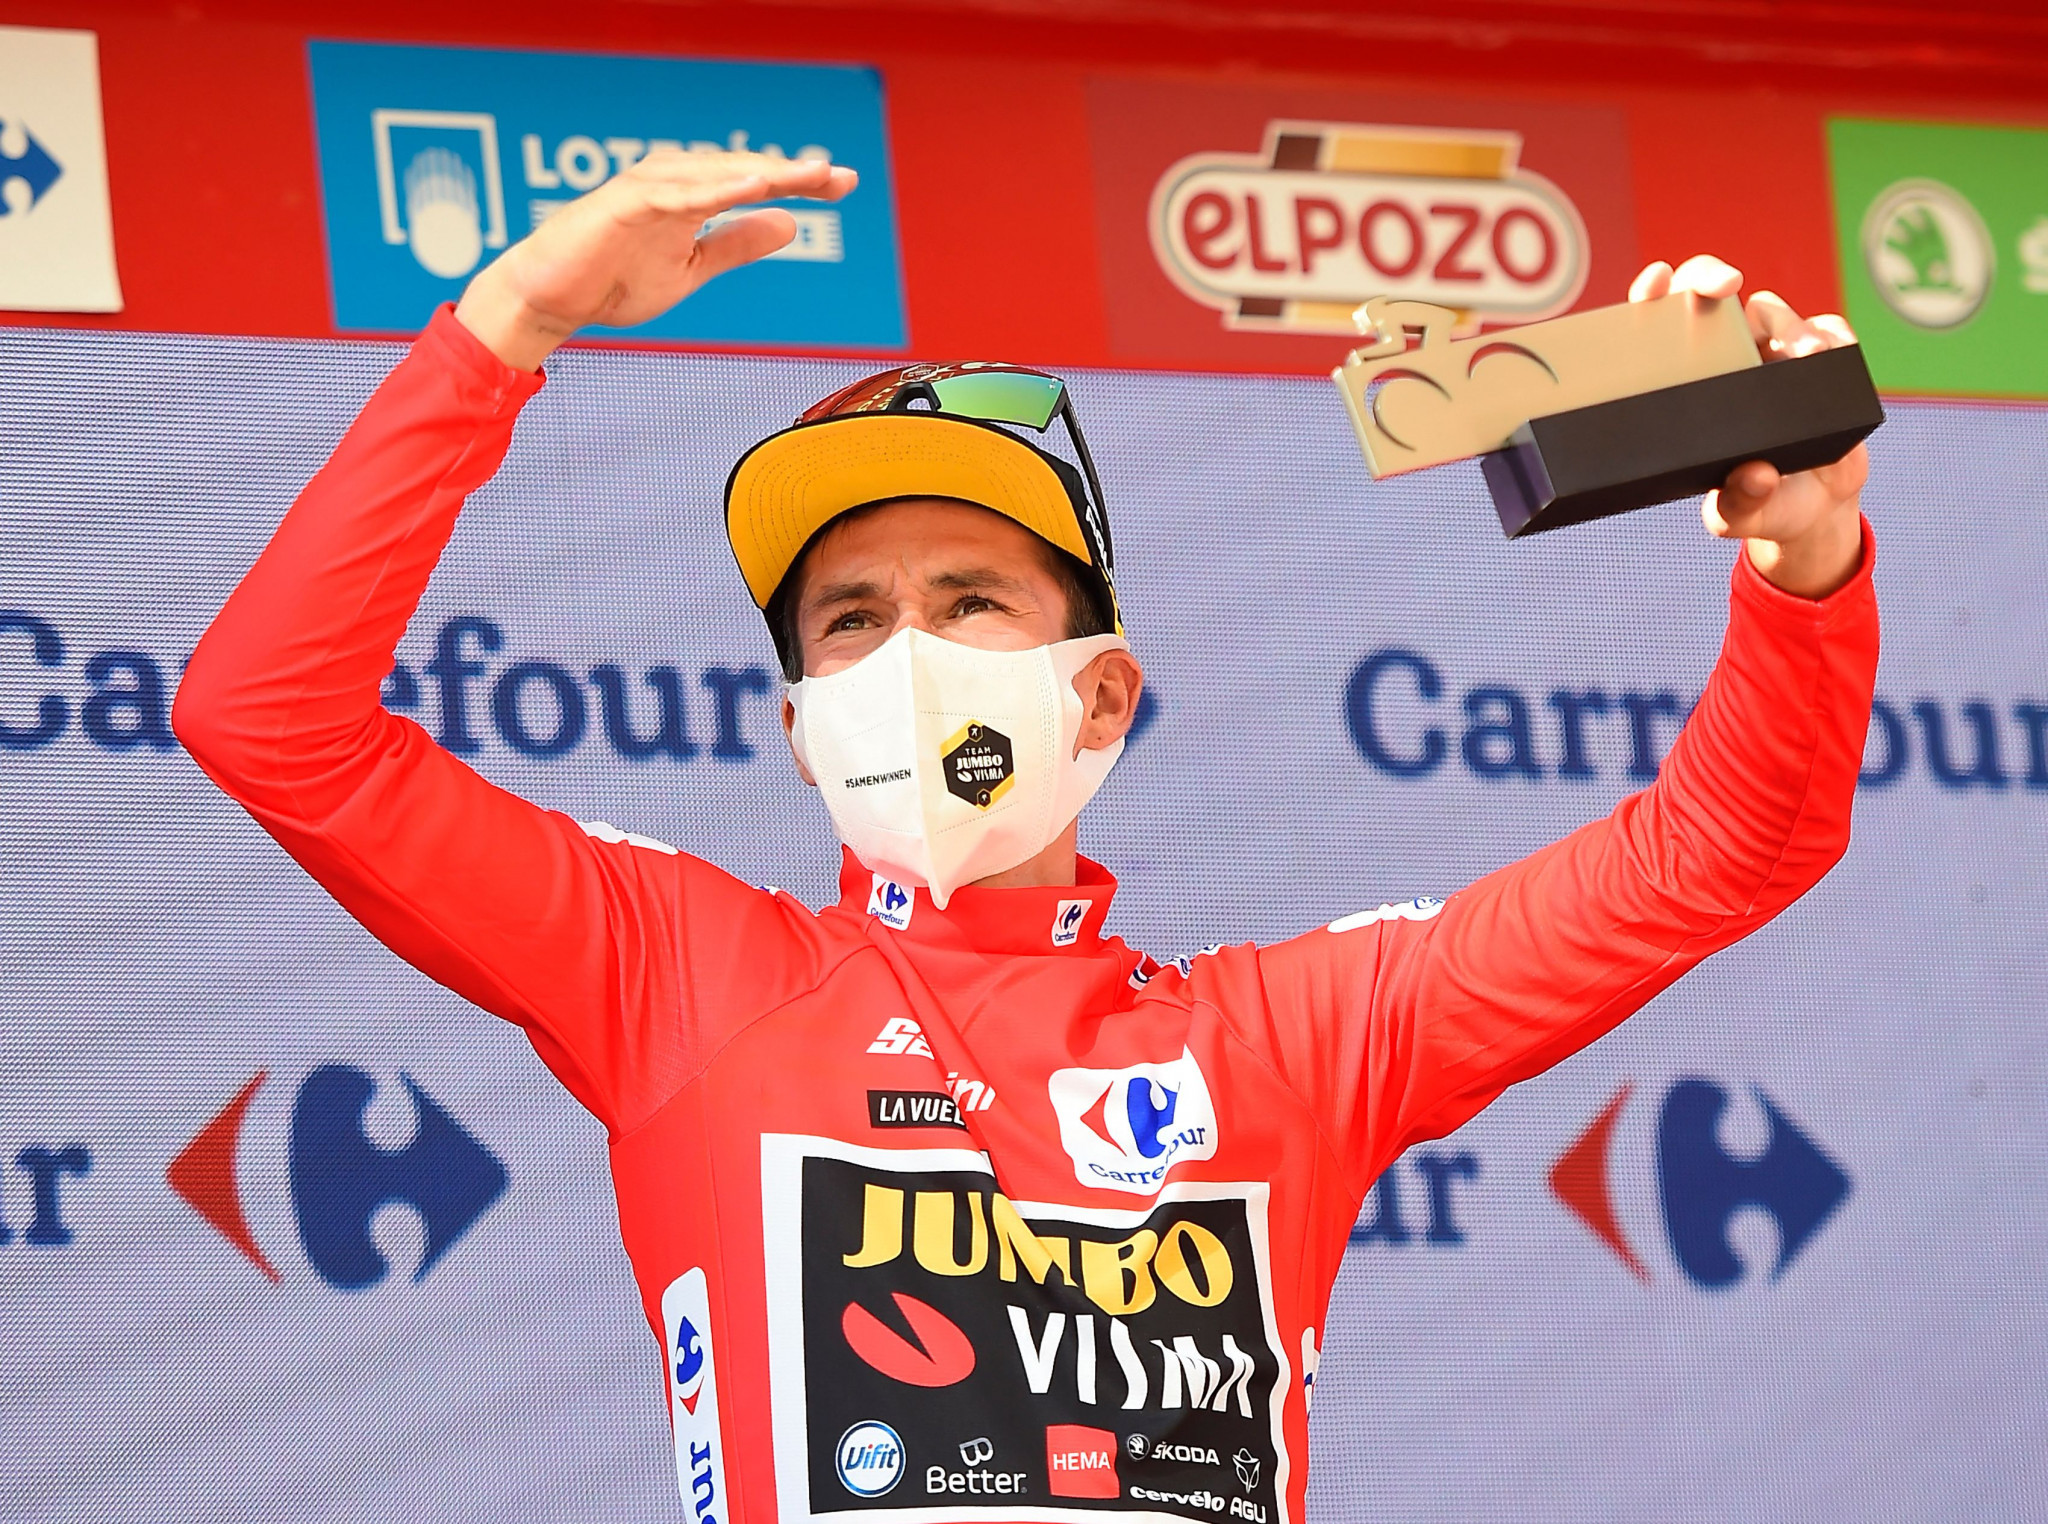 Primož Roglič retained the race leader's red jersey heading into the first summit finish of the Vuelta, scheduled to take place tomorrow ©Getty Images